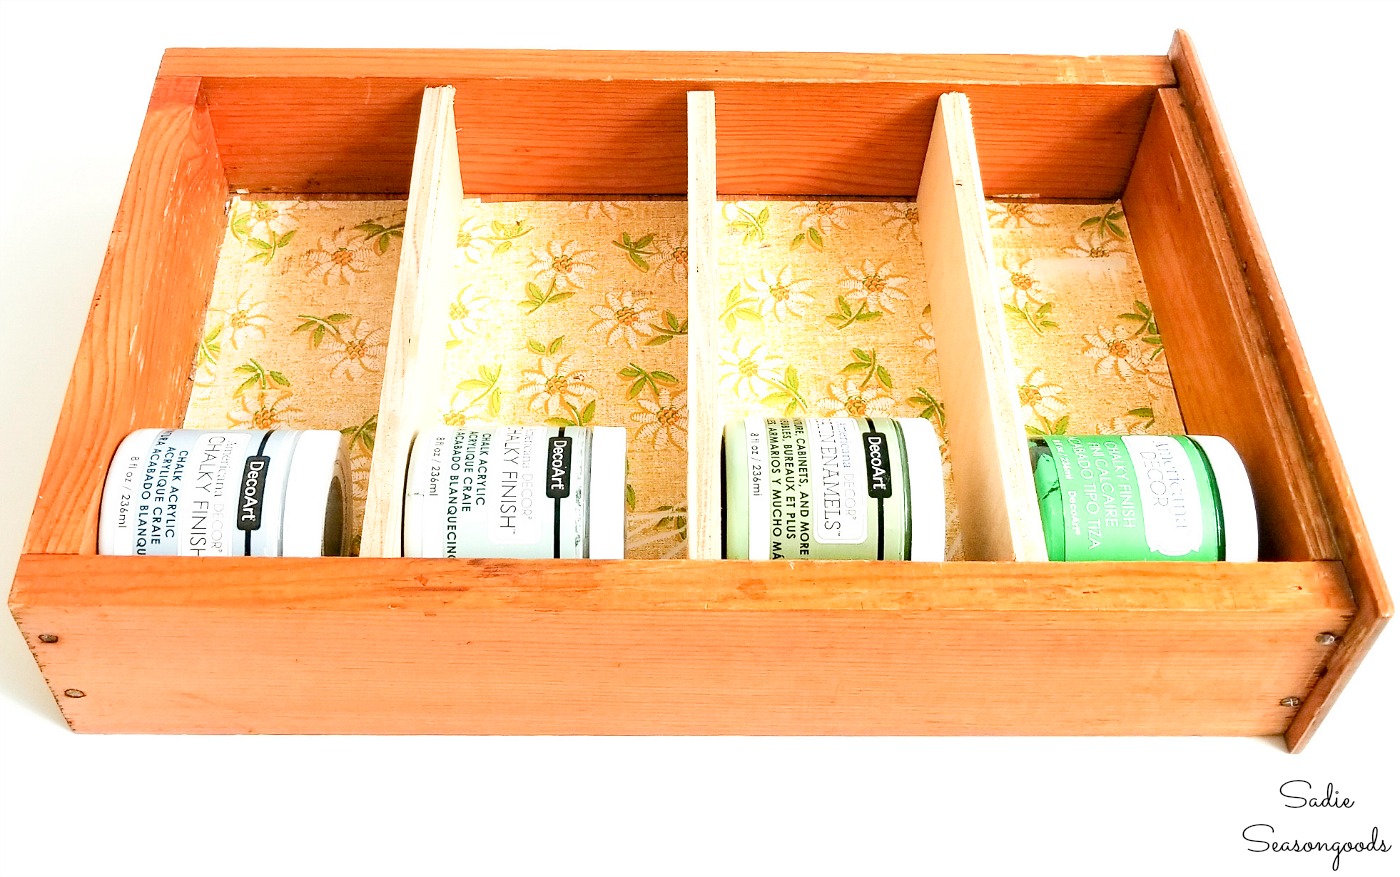 Upcycling the wooden drawers as craft paint storage